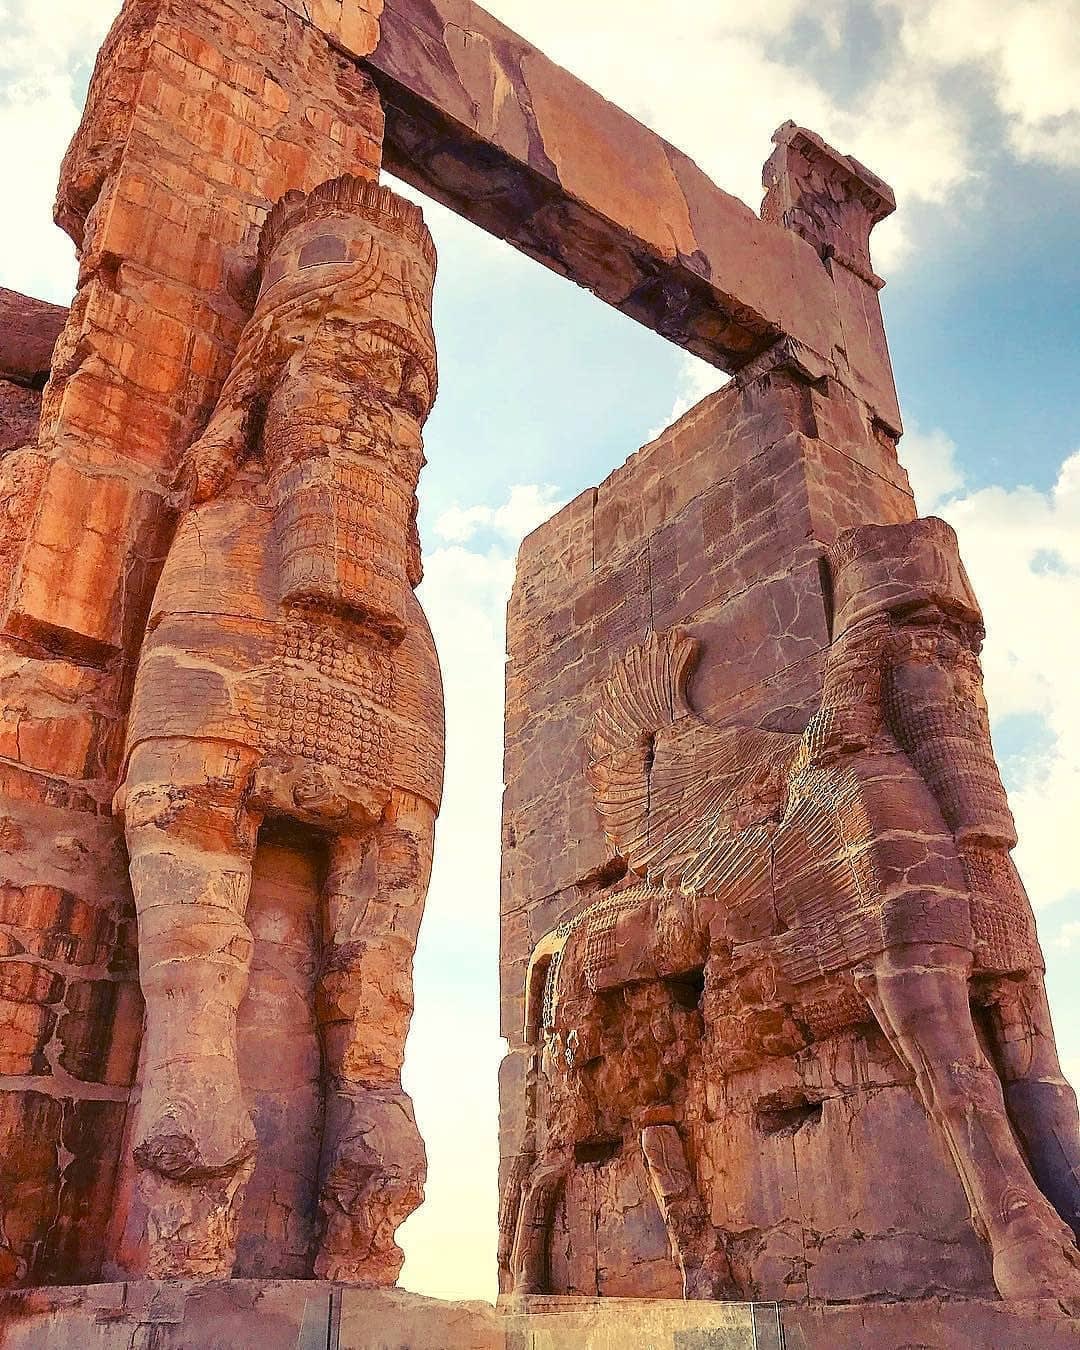 The Gate of All Nations (Old Persian: duvarthim visadahyum) also known as the Gate of Xerxes , is located in the ruins of the ancient city of Persepolis, Fars Province, Iran 486-465 BC .